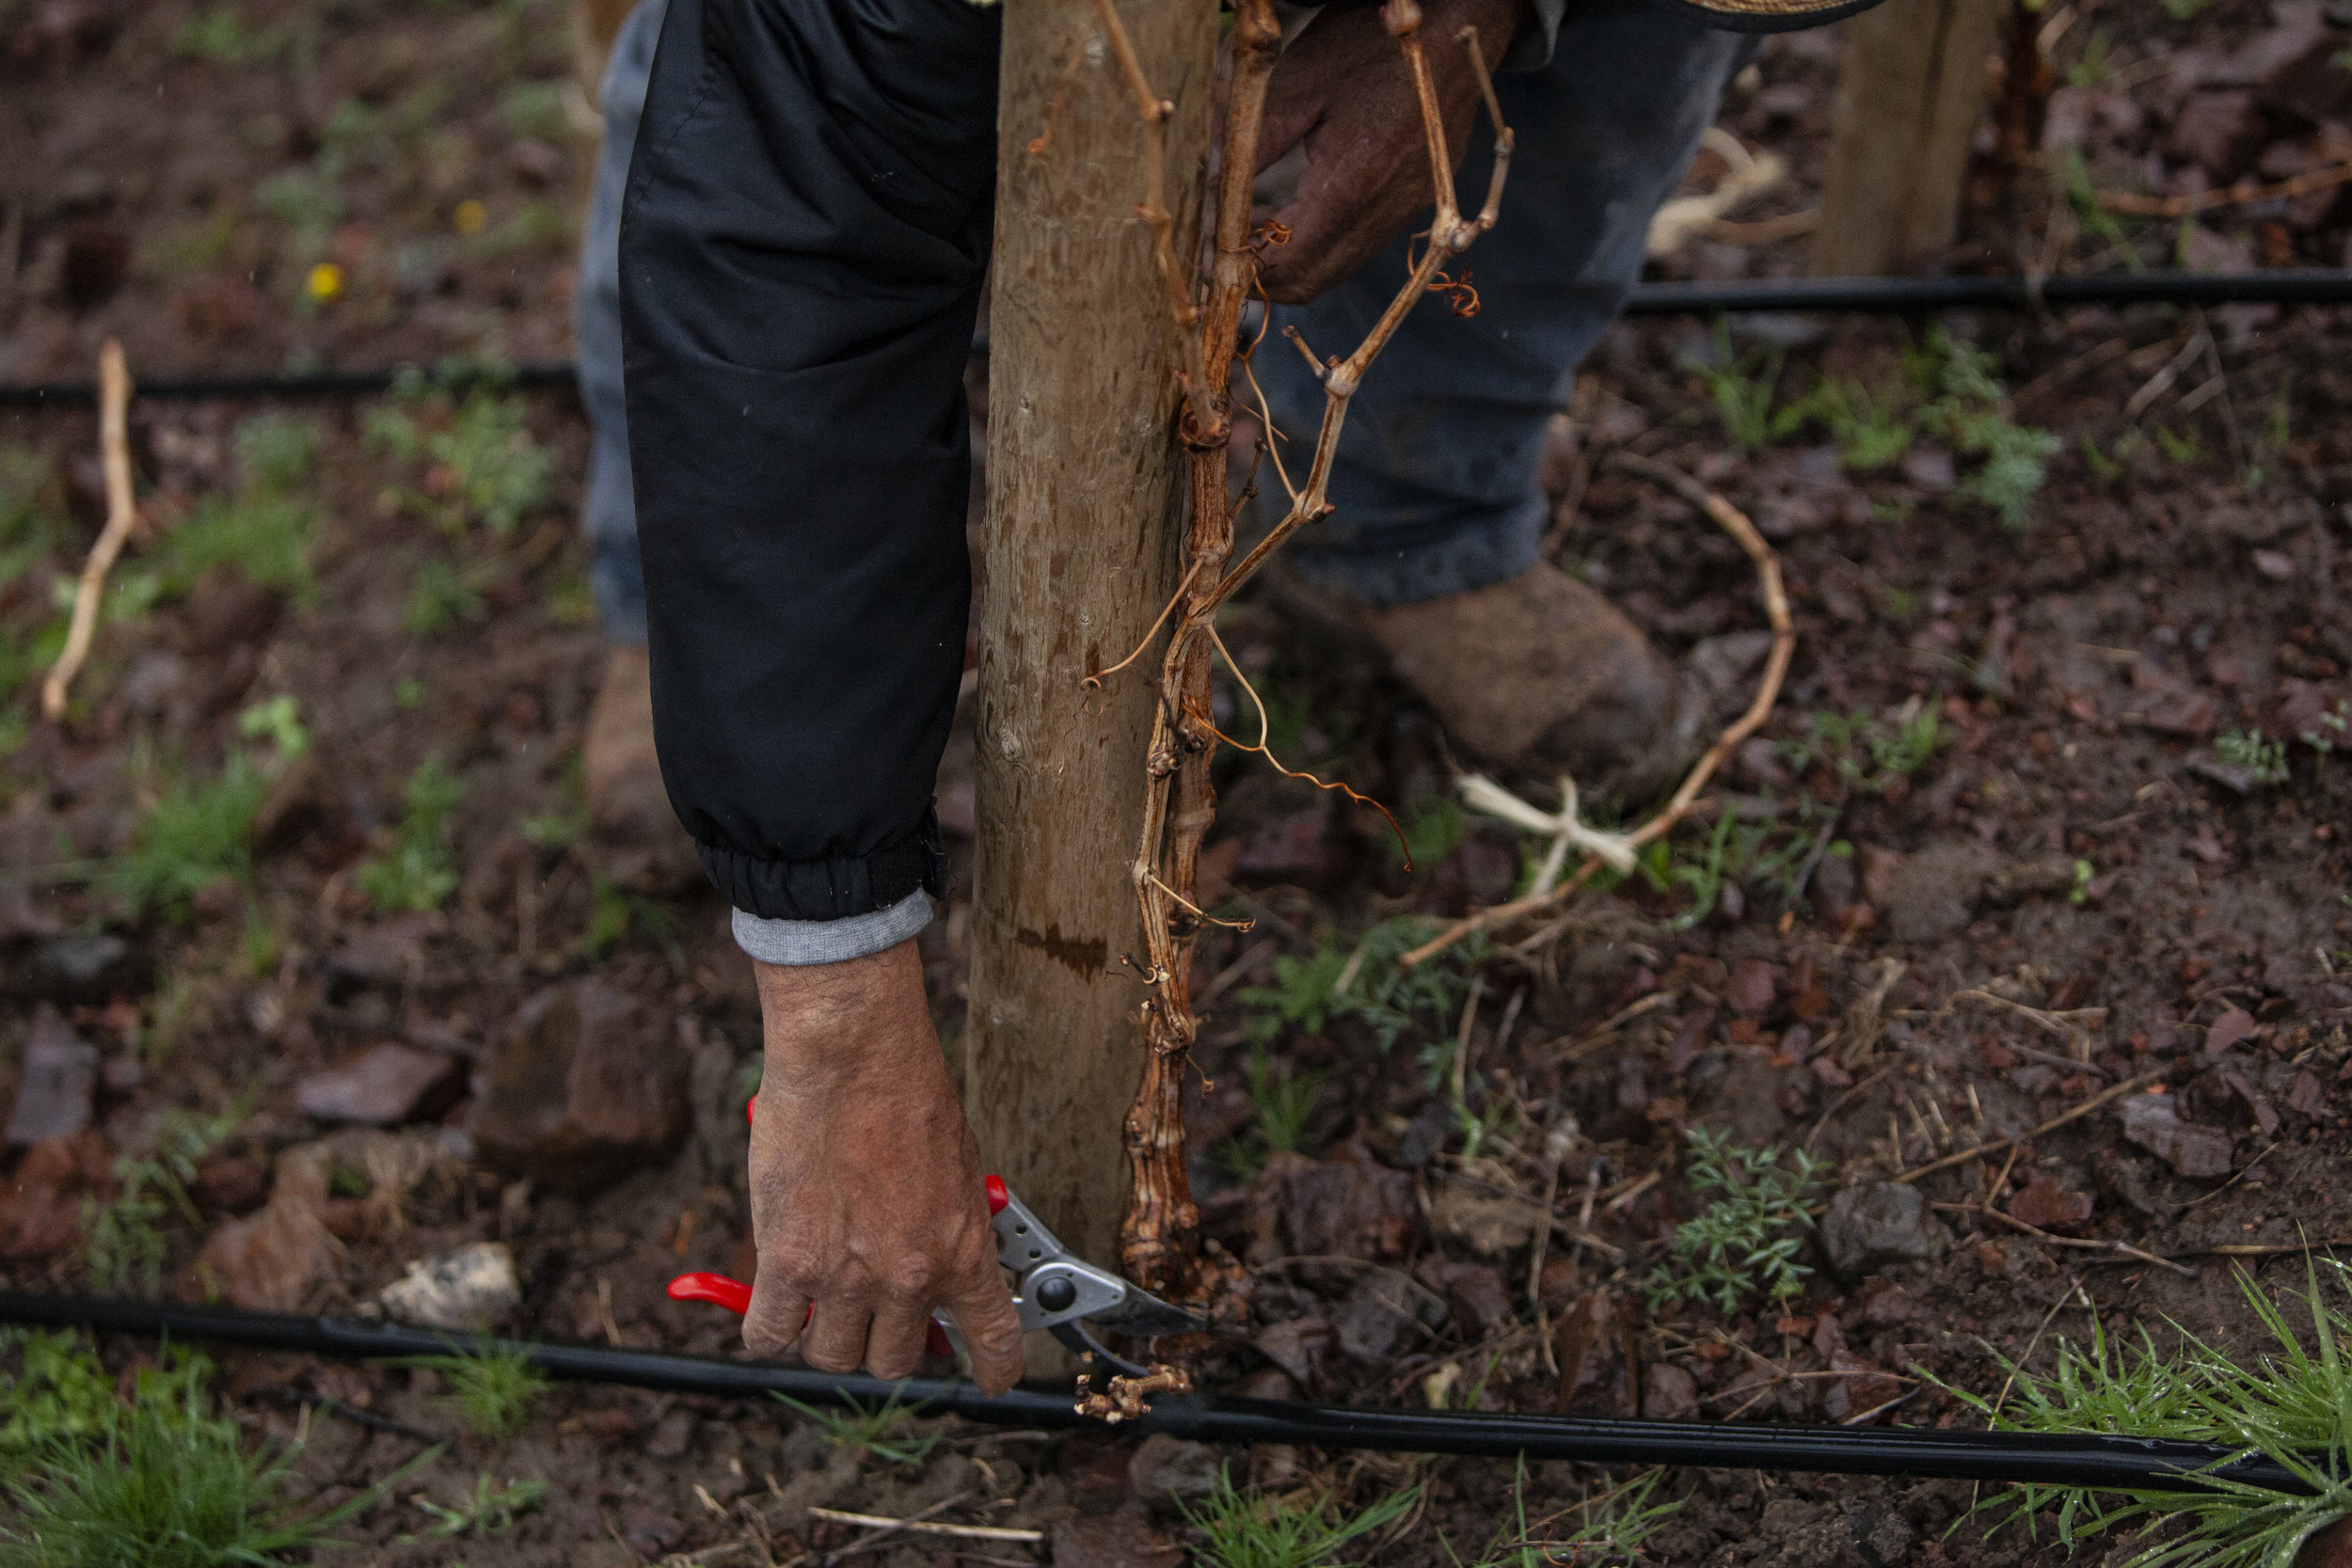 Pruning back vines in preparation for next year's crop